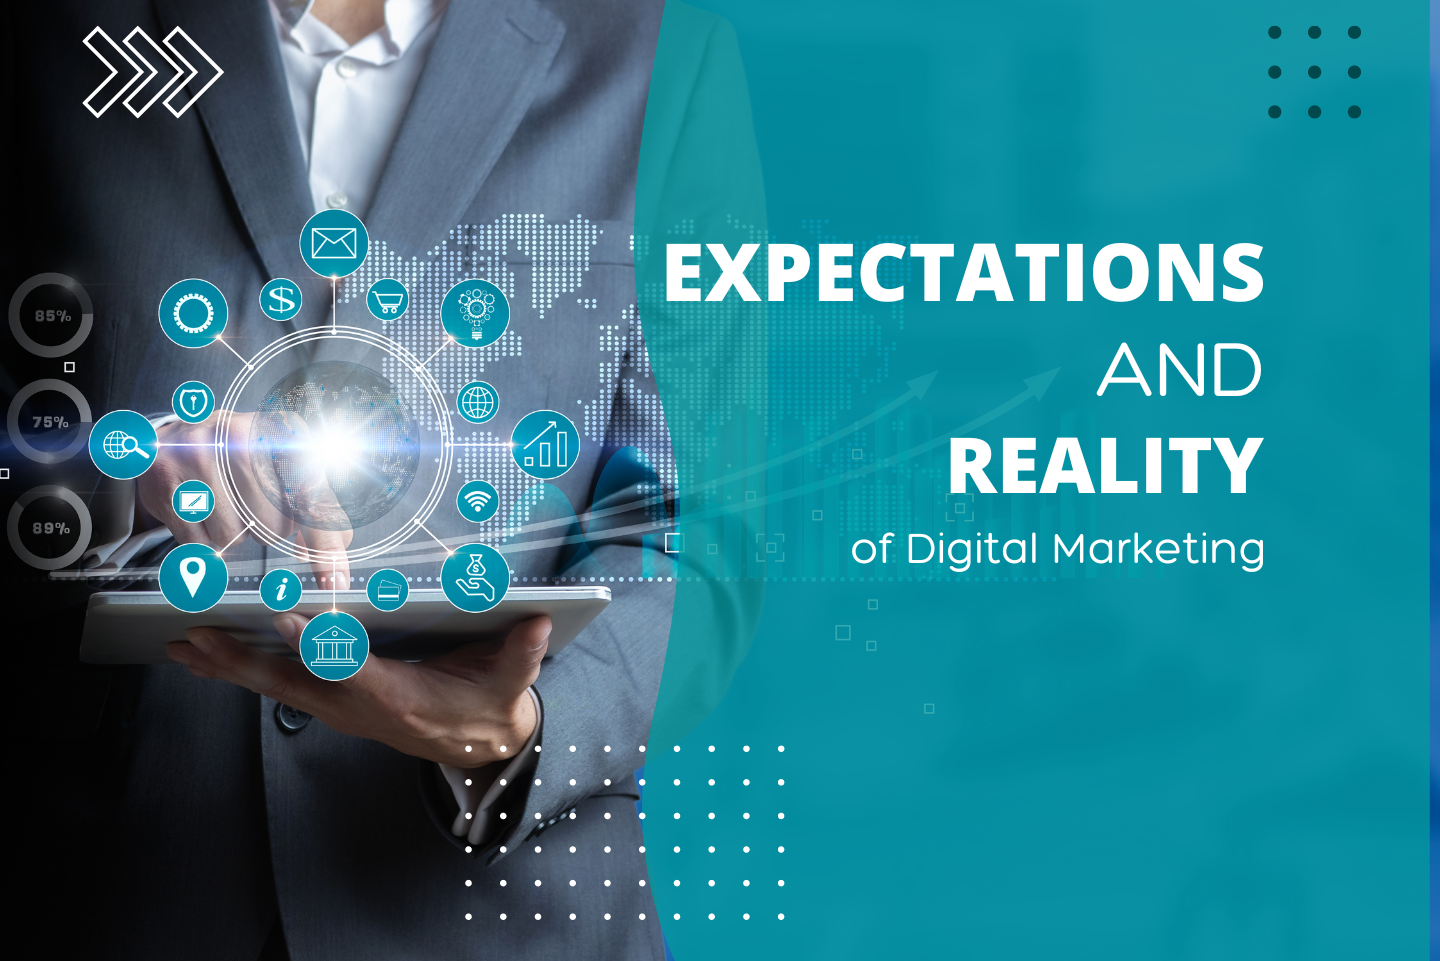 What are the Expectations and Reality of Digital Marketing?